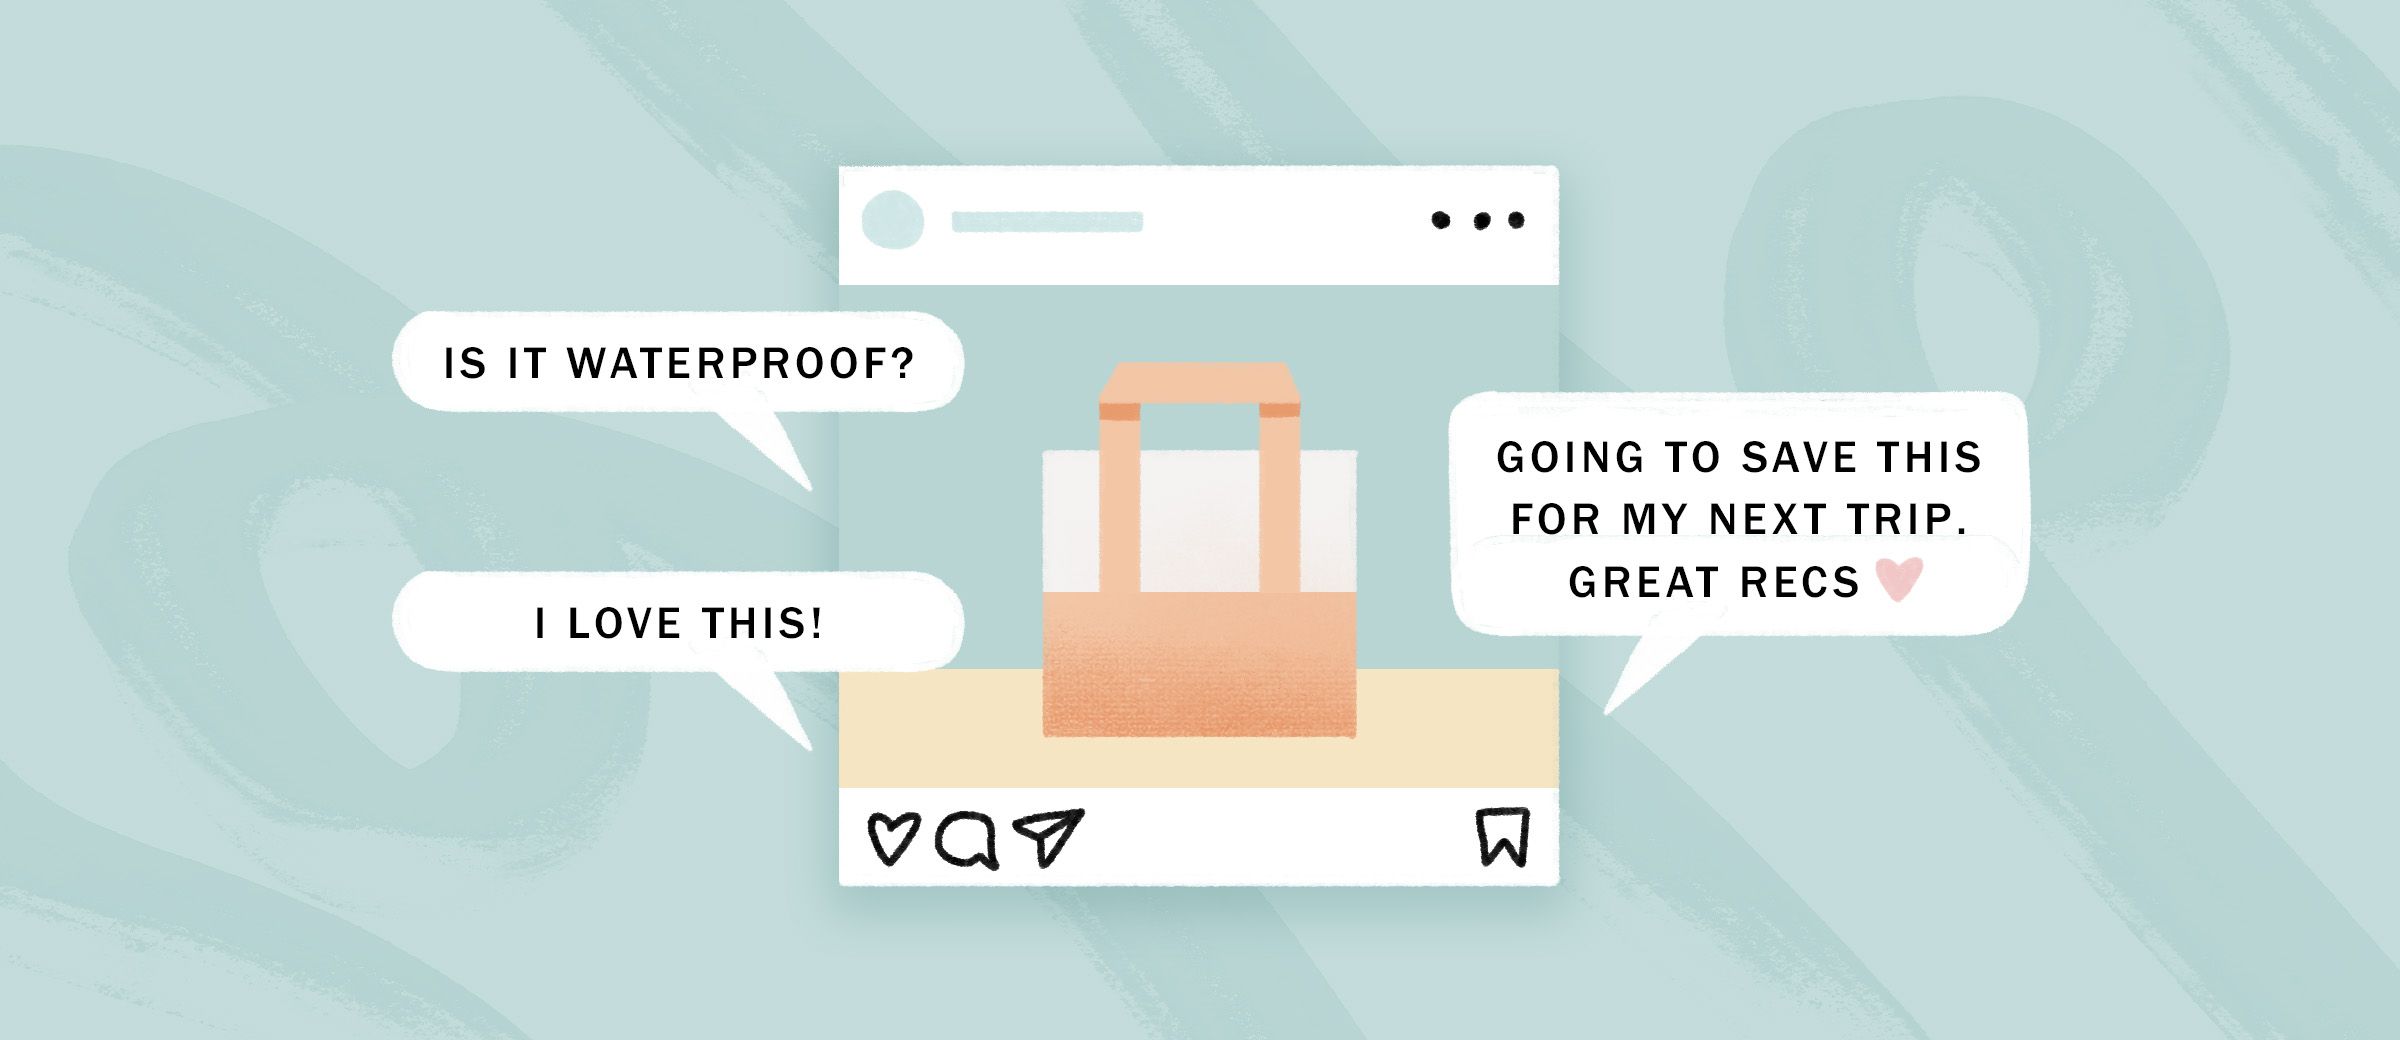 Read about 11 Tips on How to Get Engaged Followers on Instagram, on PLANOLY